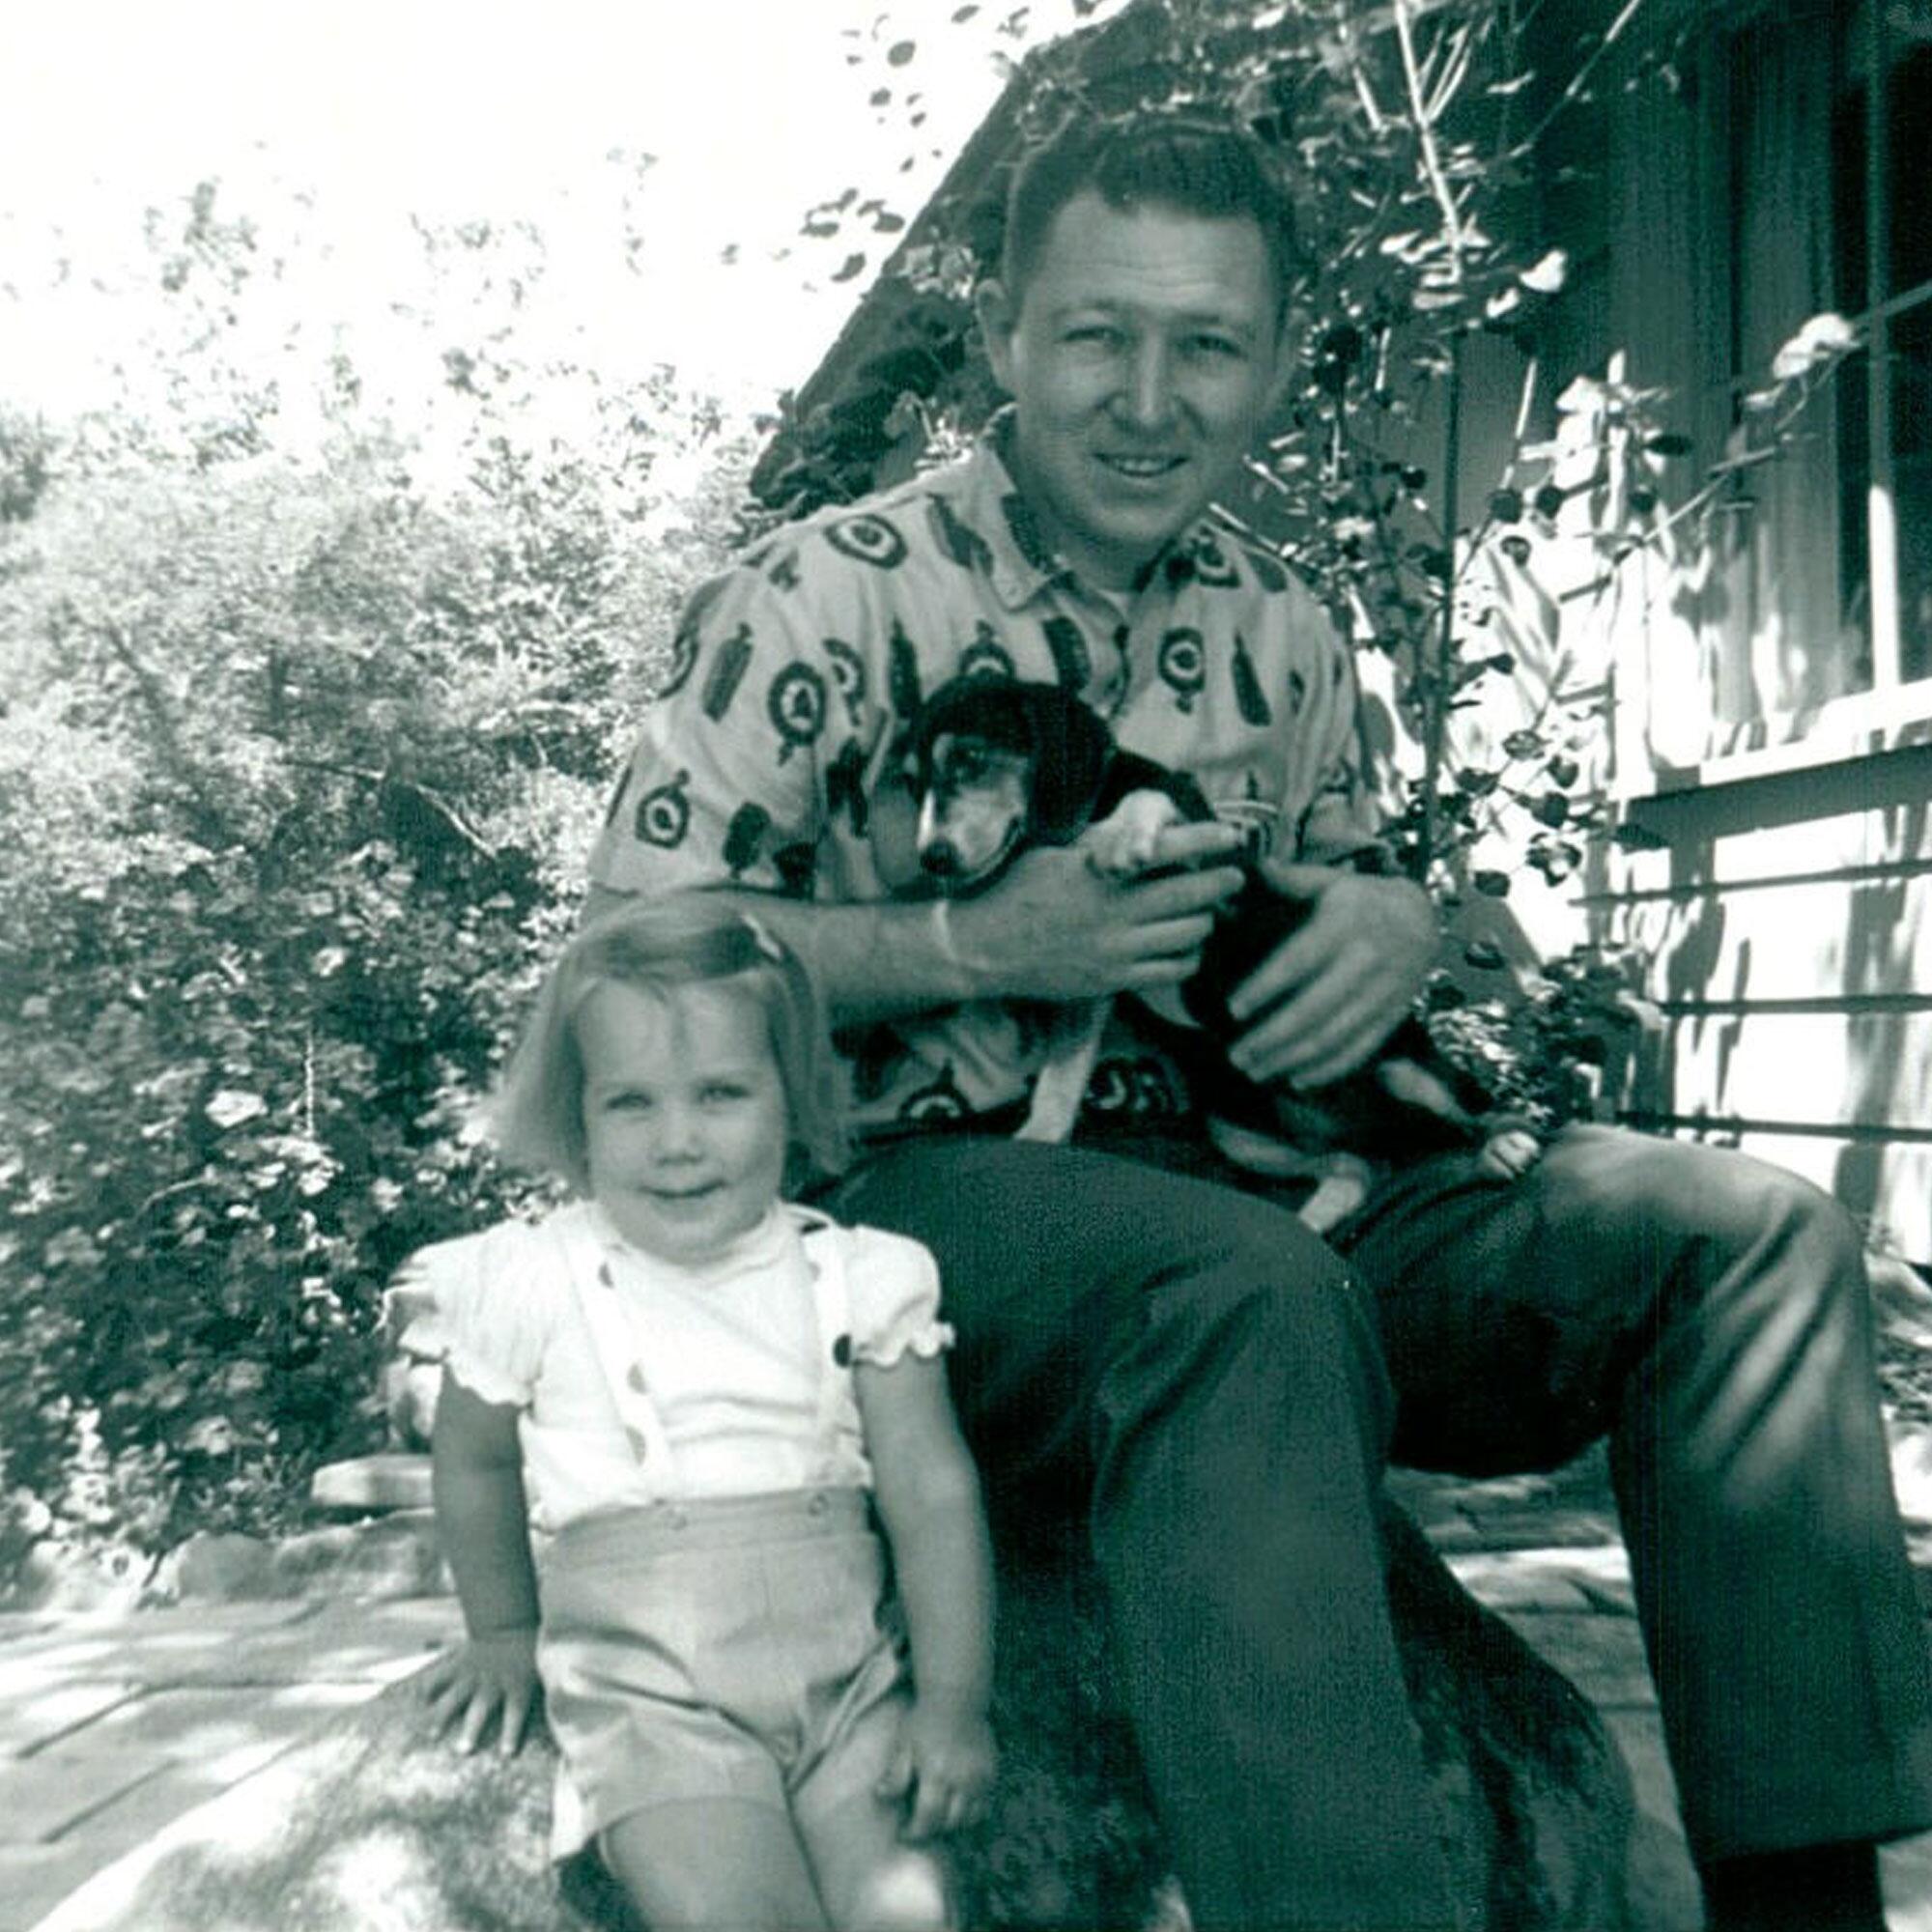 A family photo of a man with his young daughter and a small dog on his lap